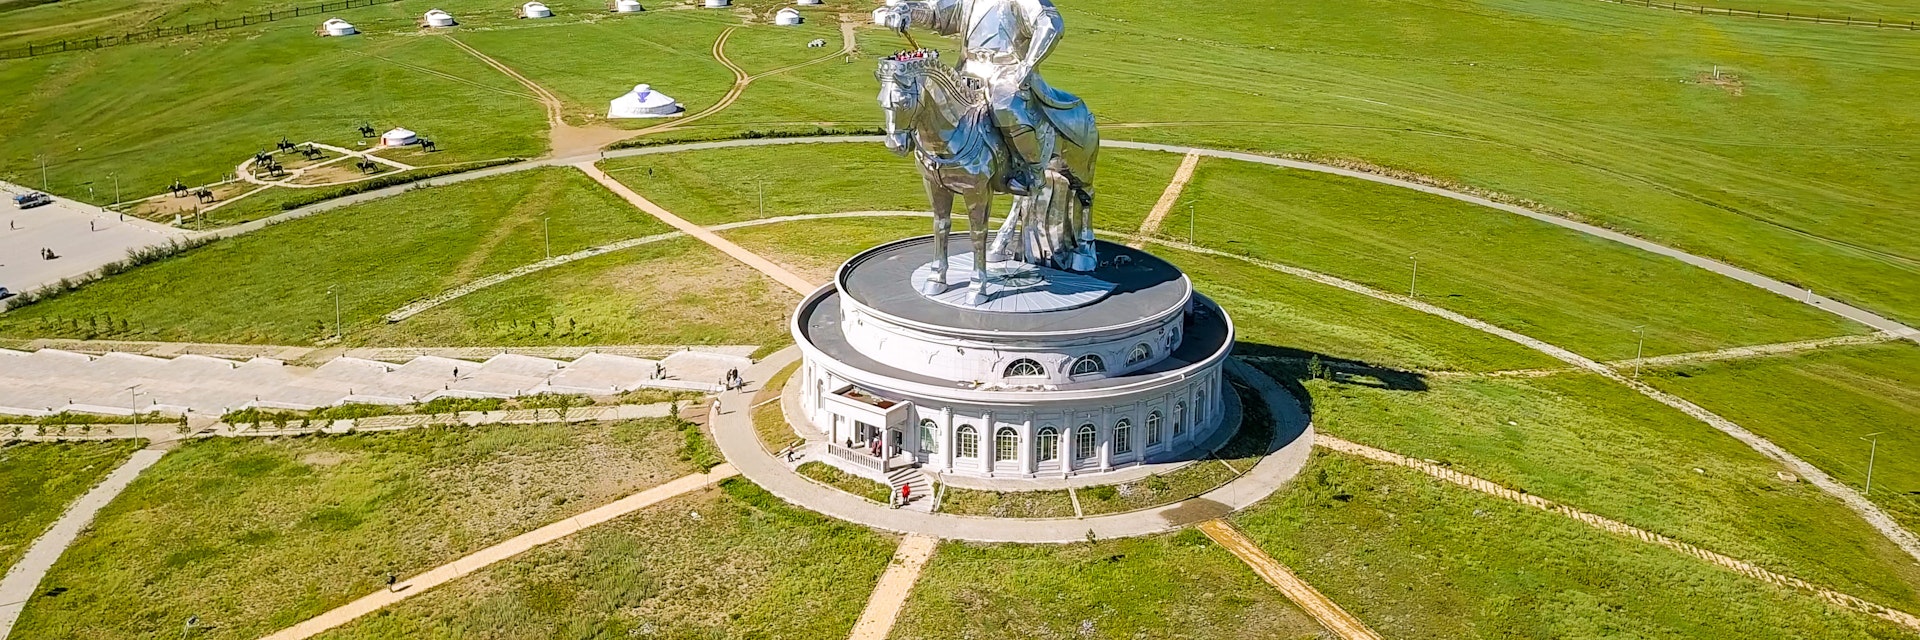 Aerial view of the equestrian statue of Genghis Khan.